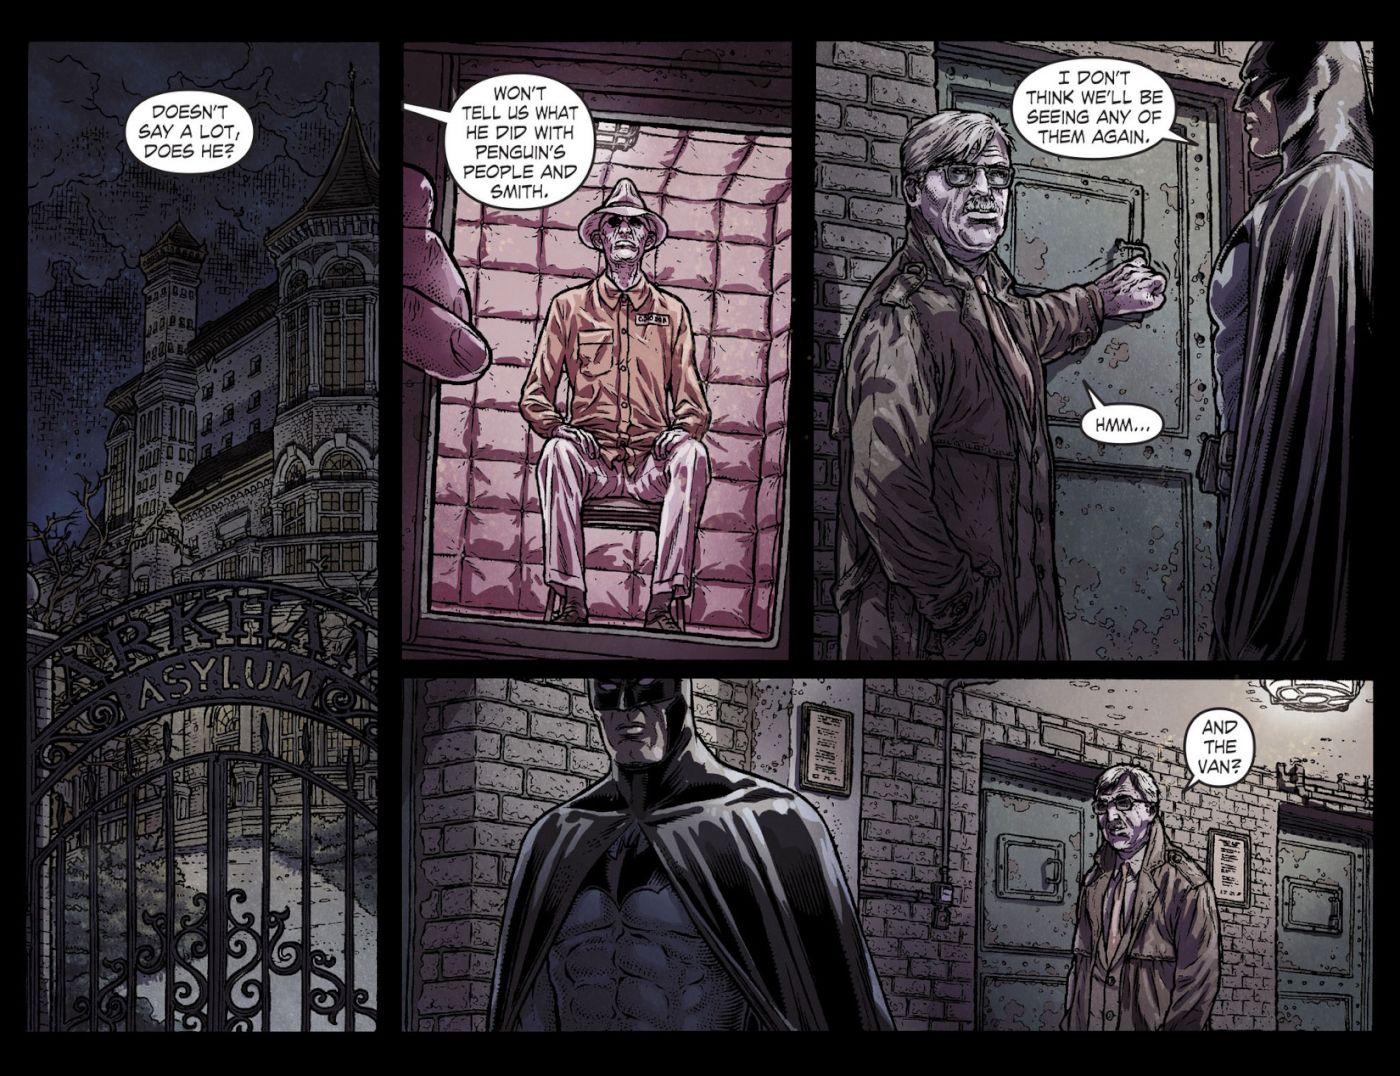 Legends of the Dark Knight #18, the Pale Driver is locked away in Arkham Asylum